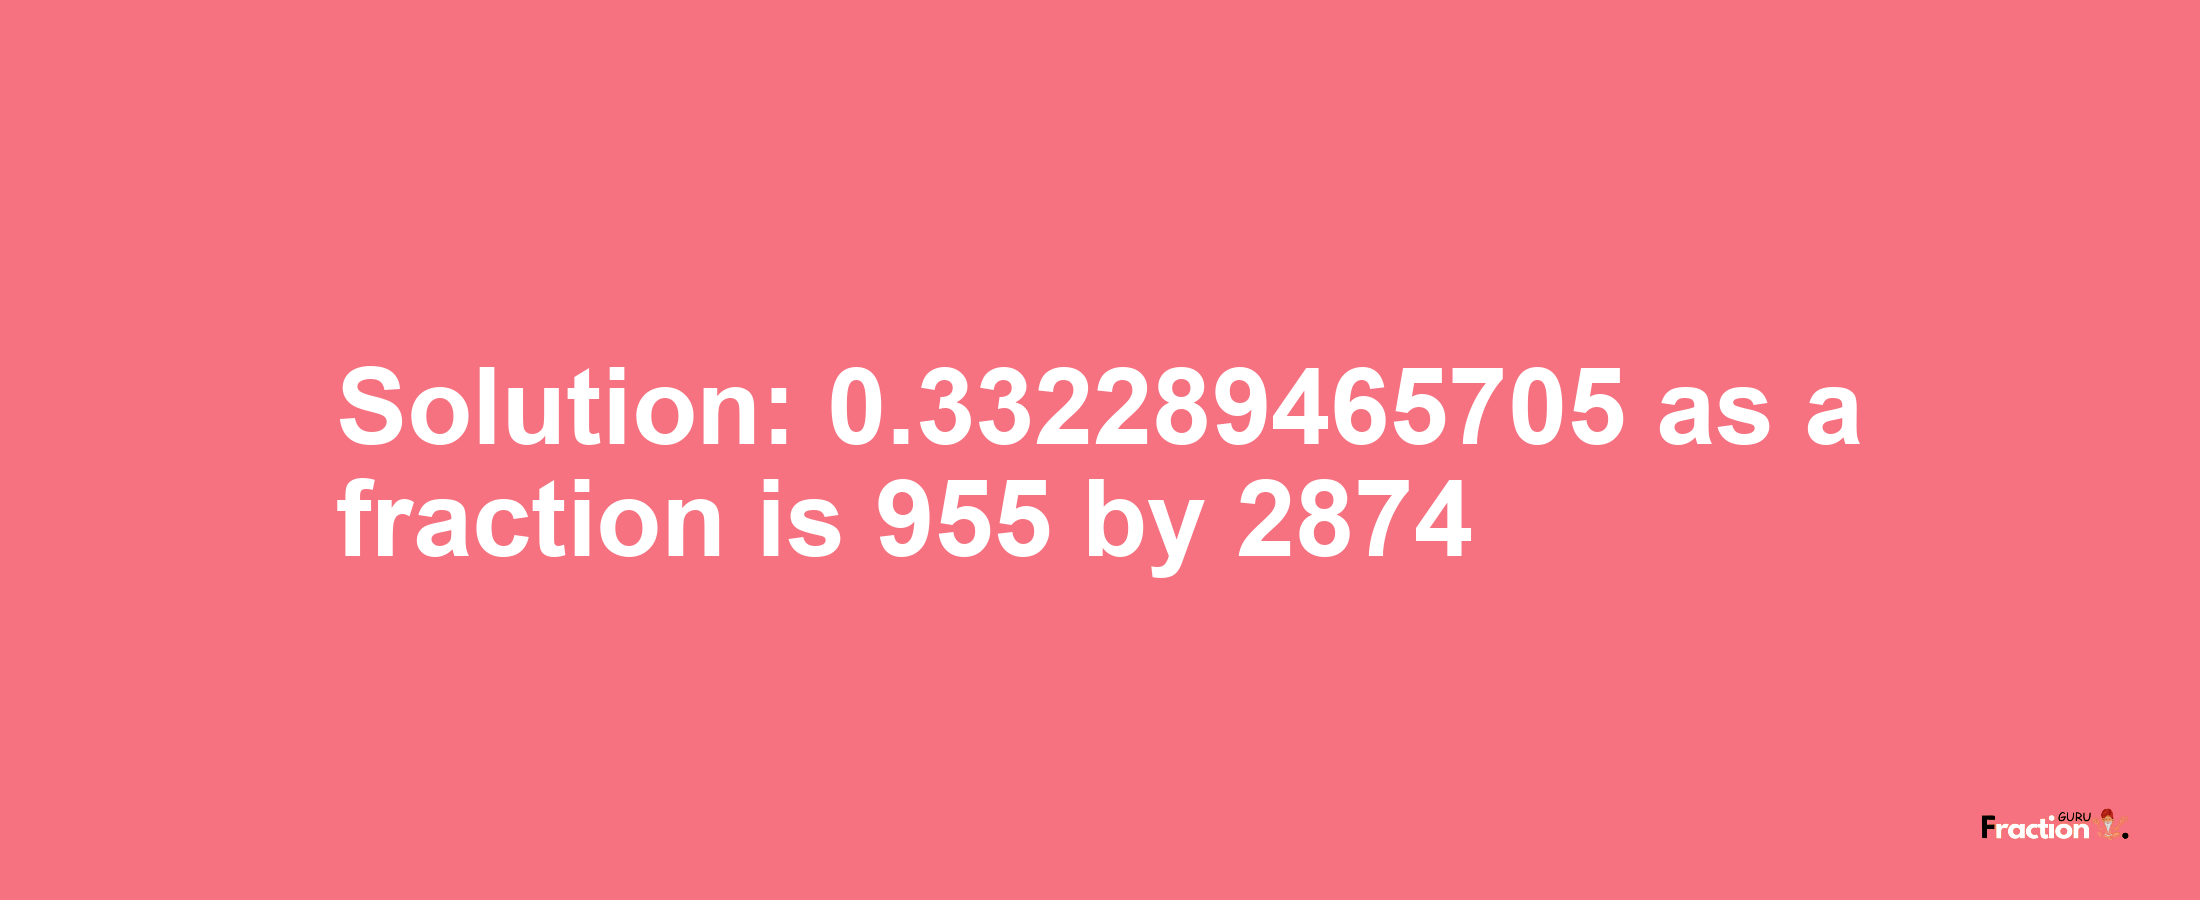 Solution:0.332289465705 as a fraction is 955/2874